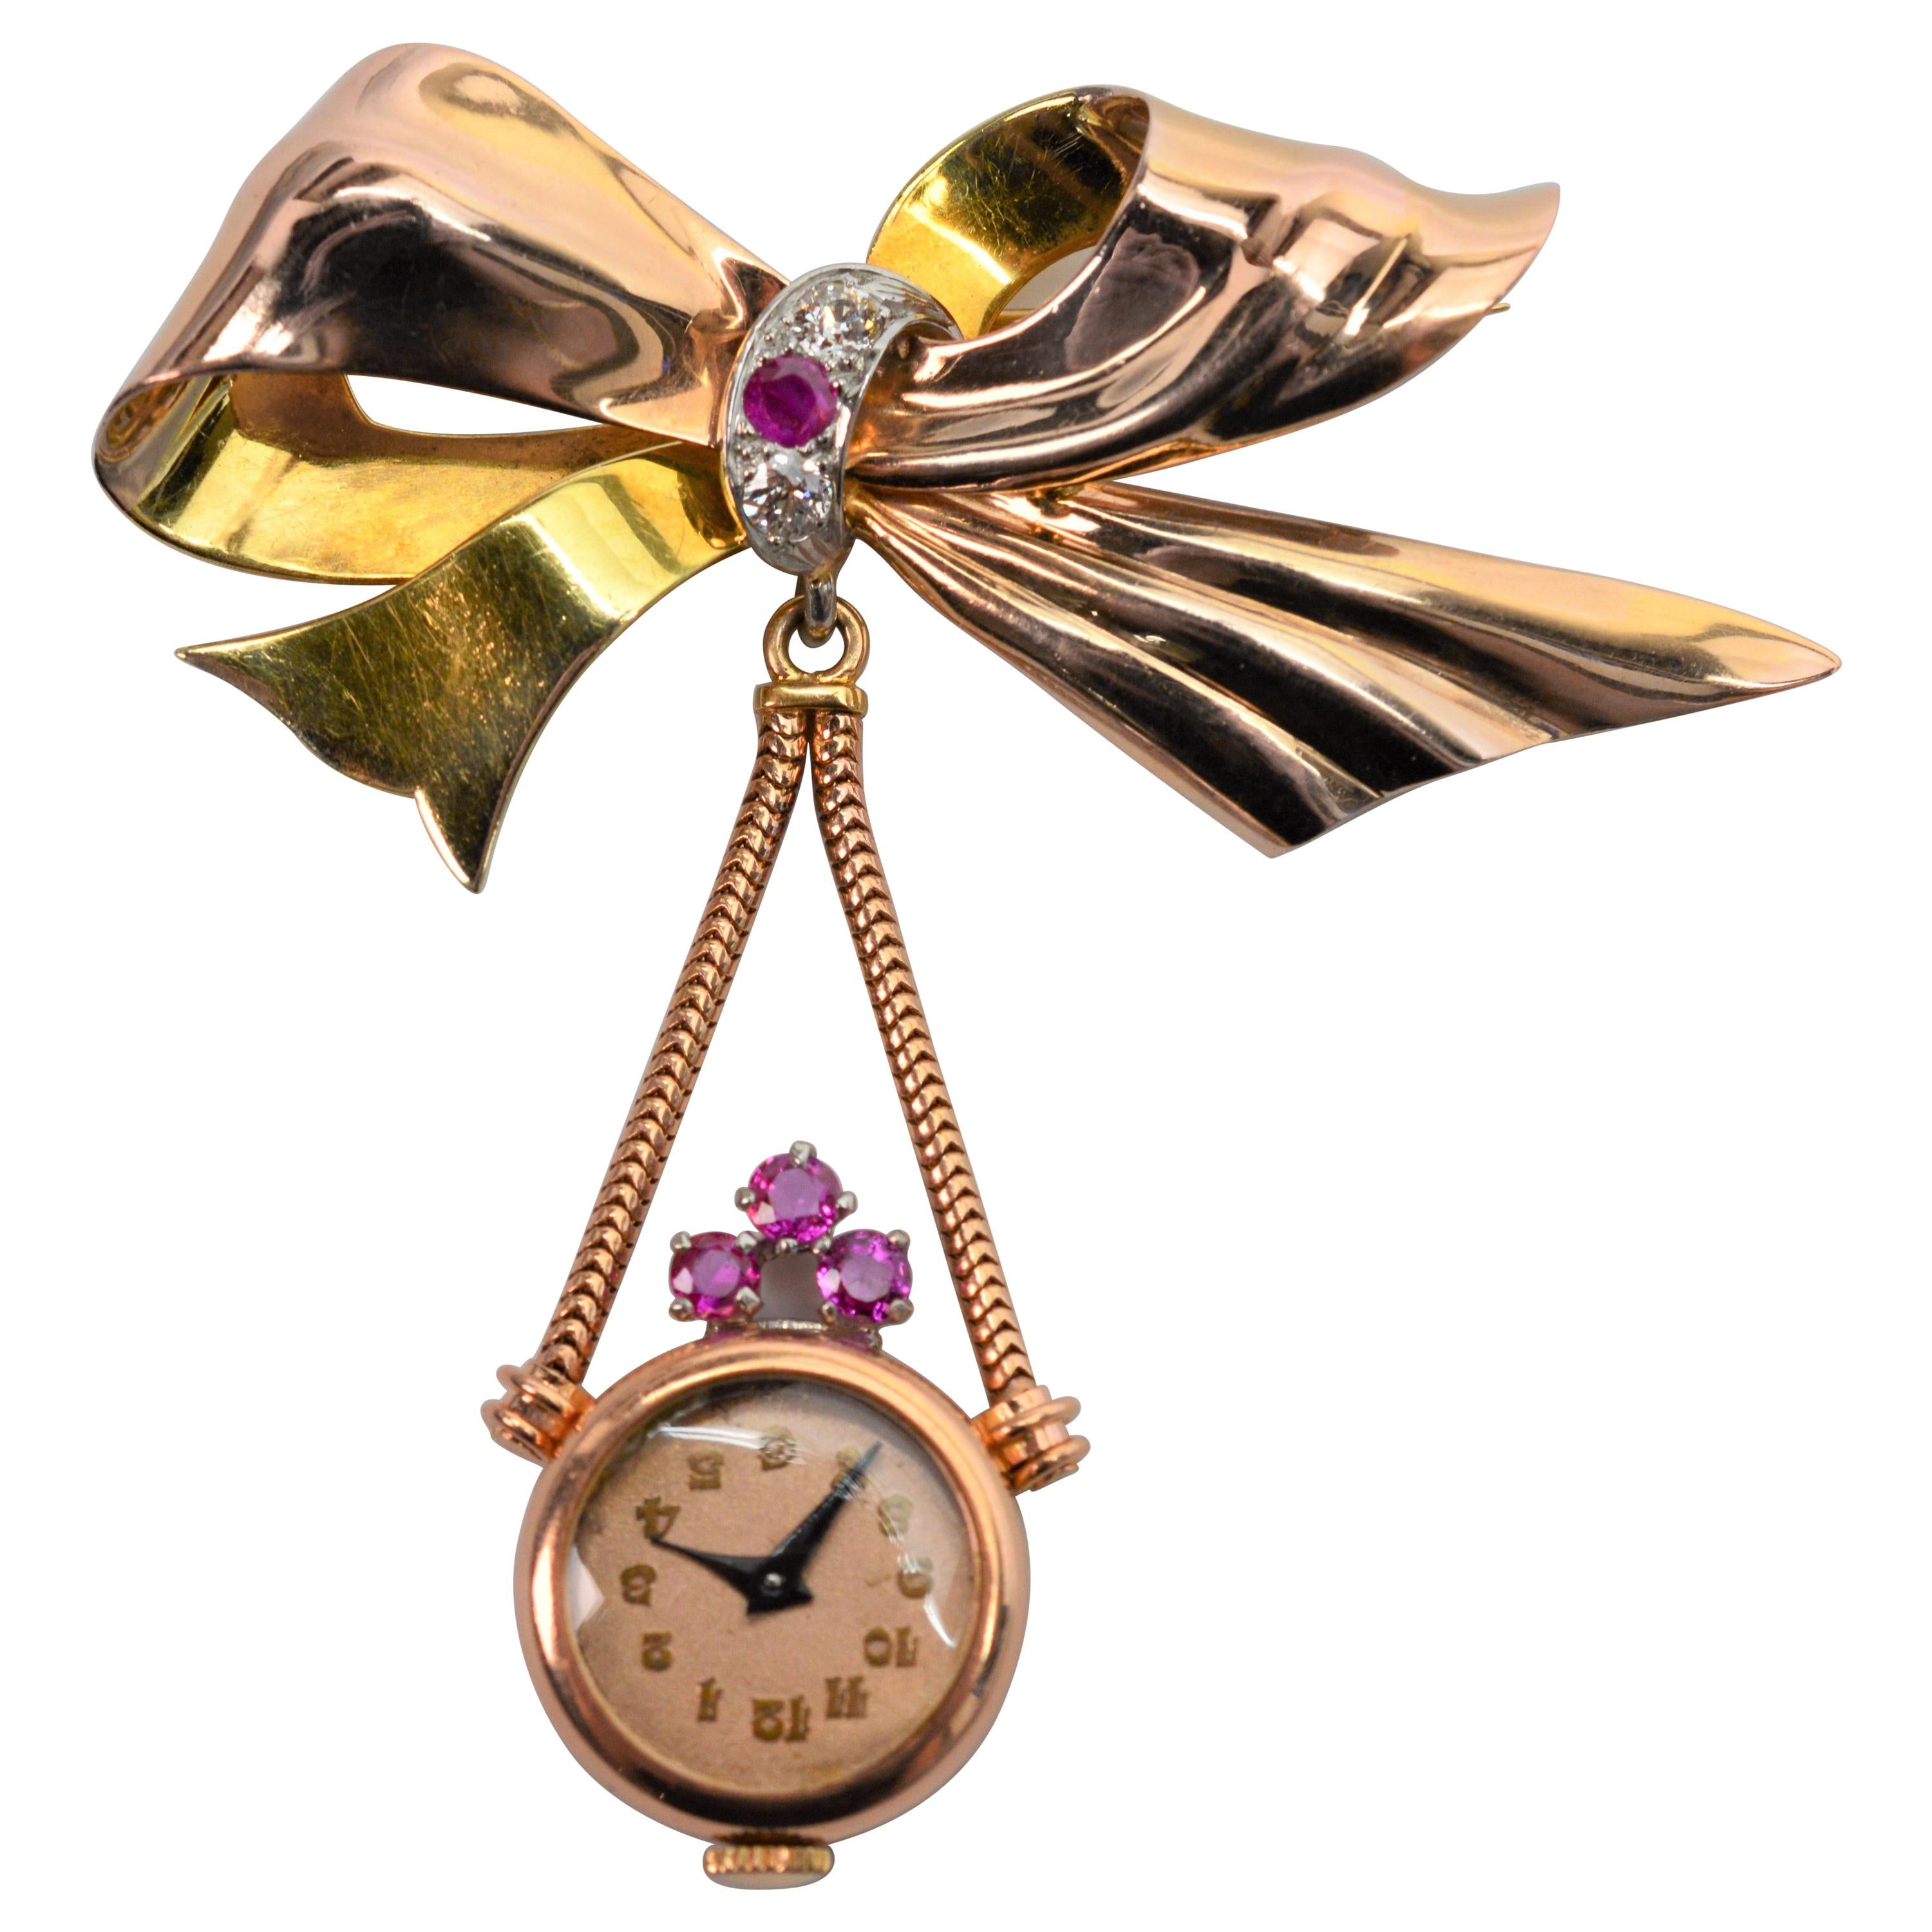 1950s Gold Pendant Watch Brooch with Rubies